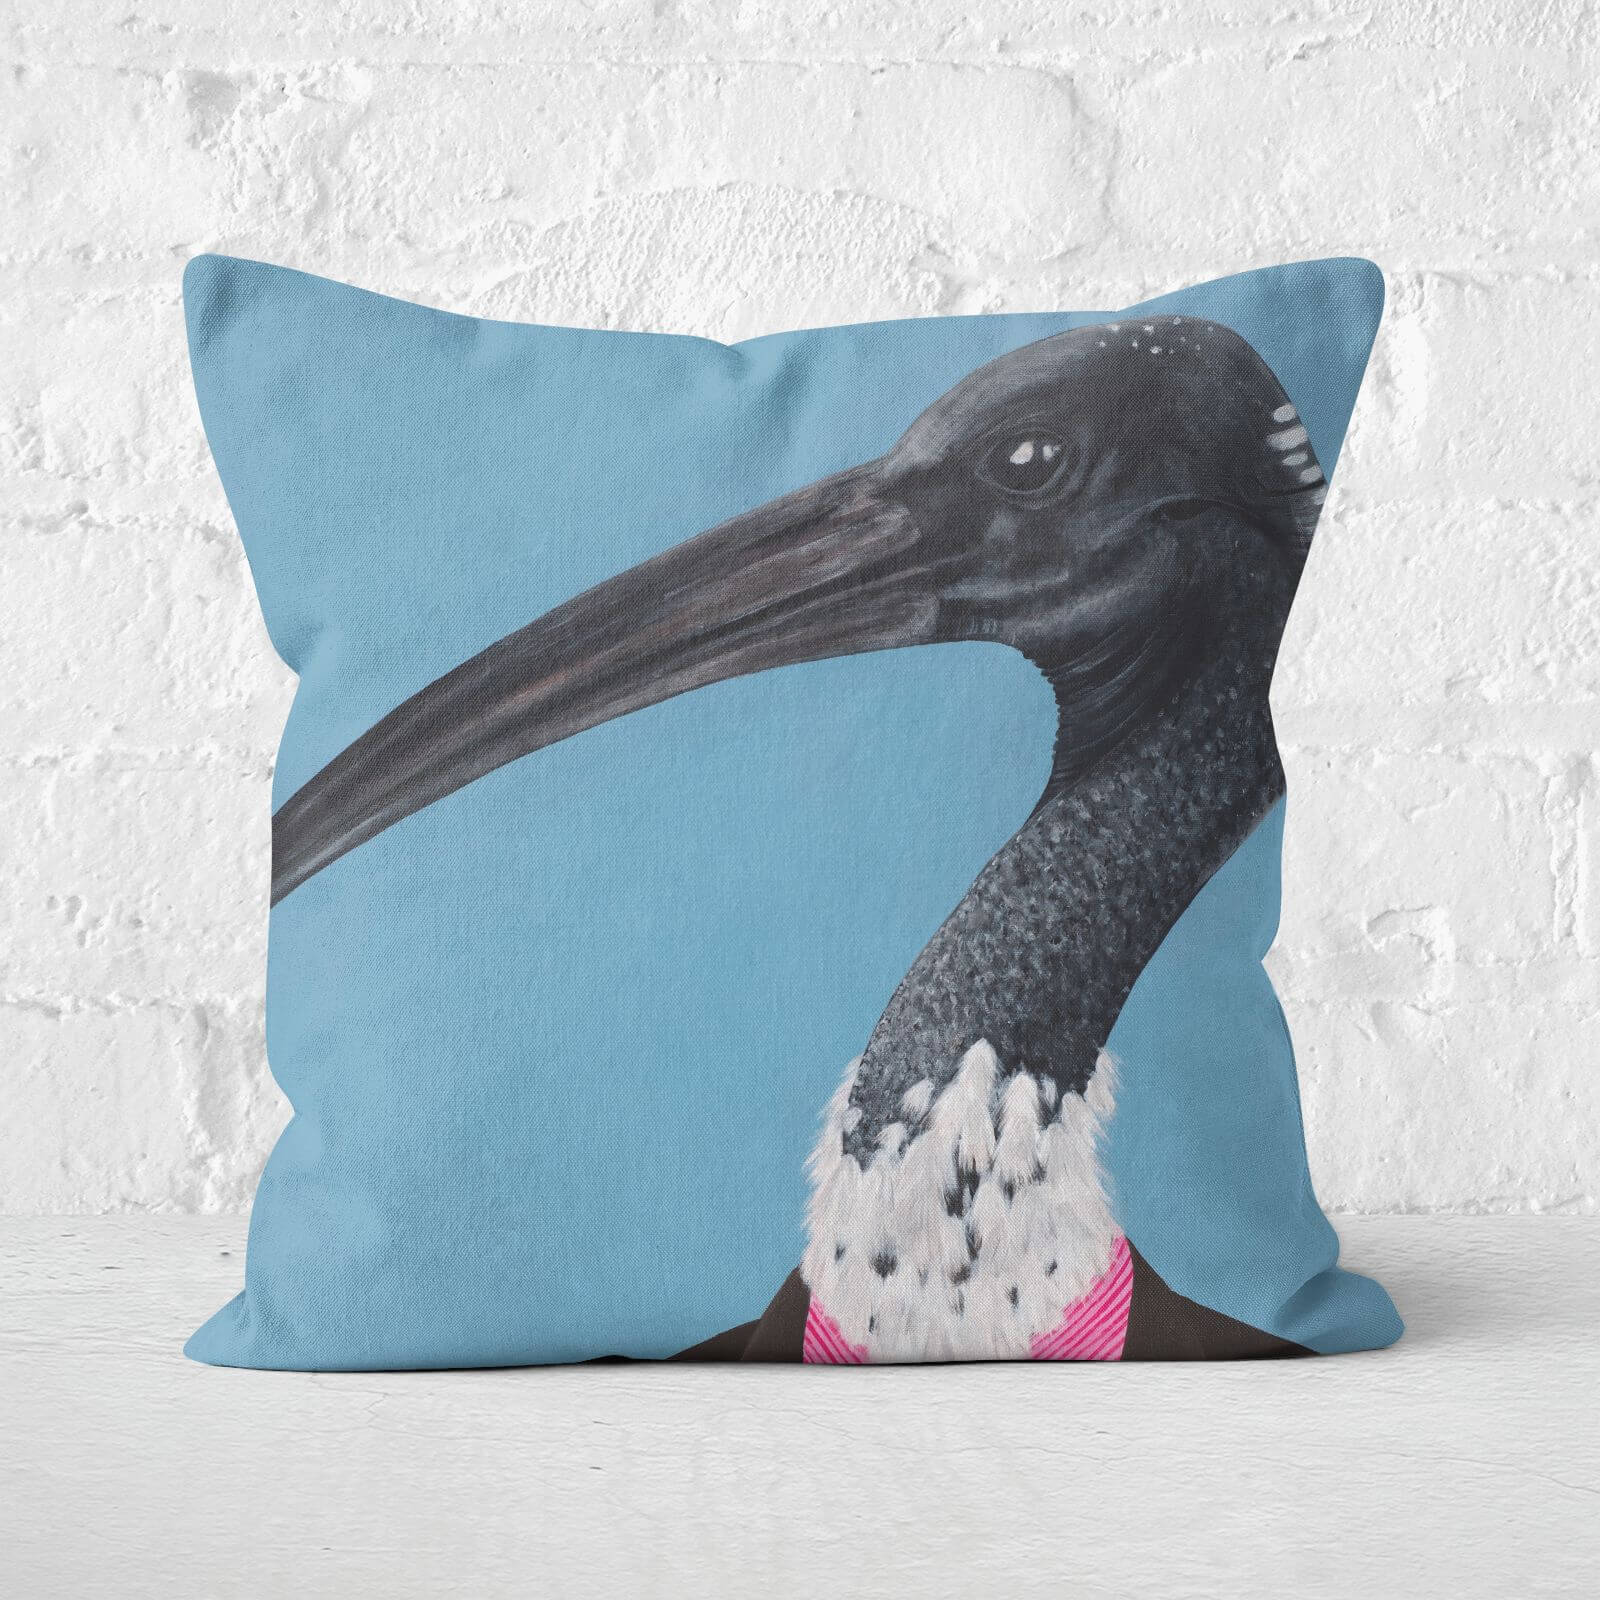 Ibis In Suit Square Cushion - 40x40cm - Soft Touch